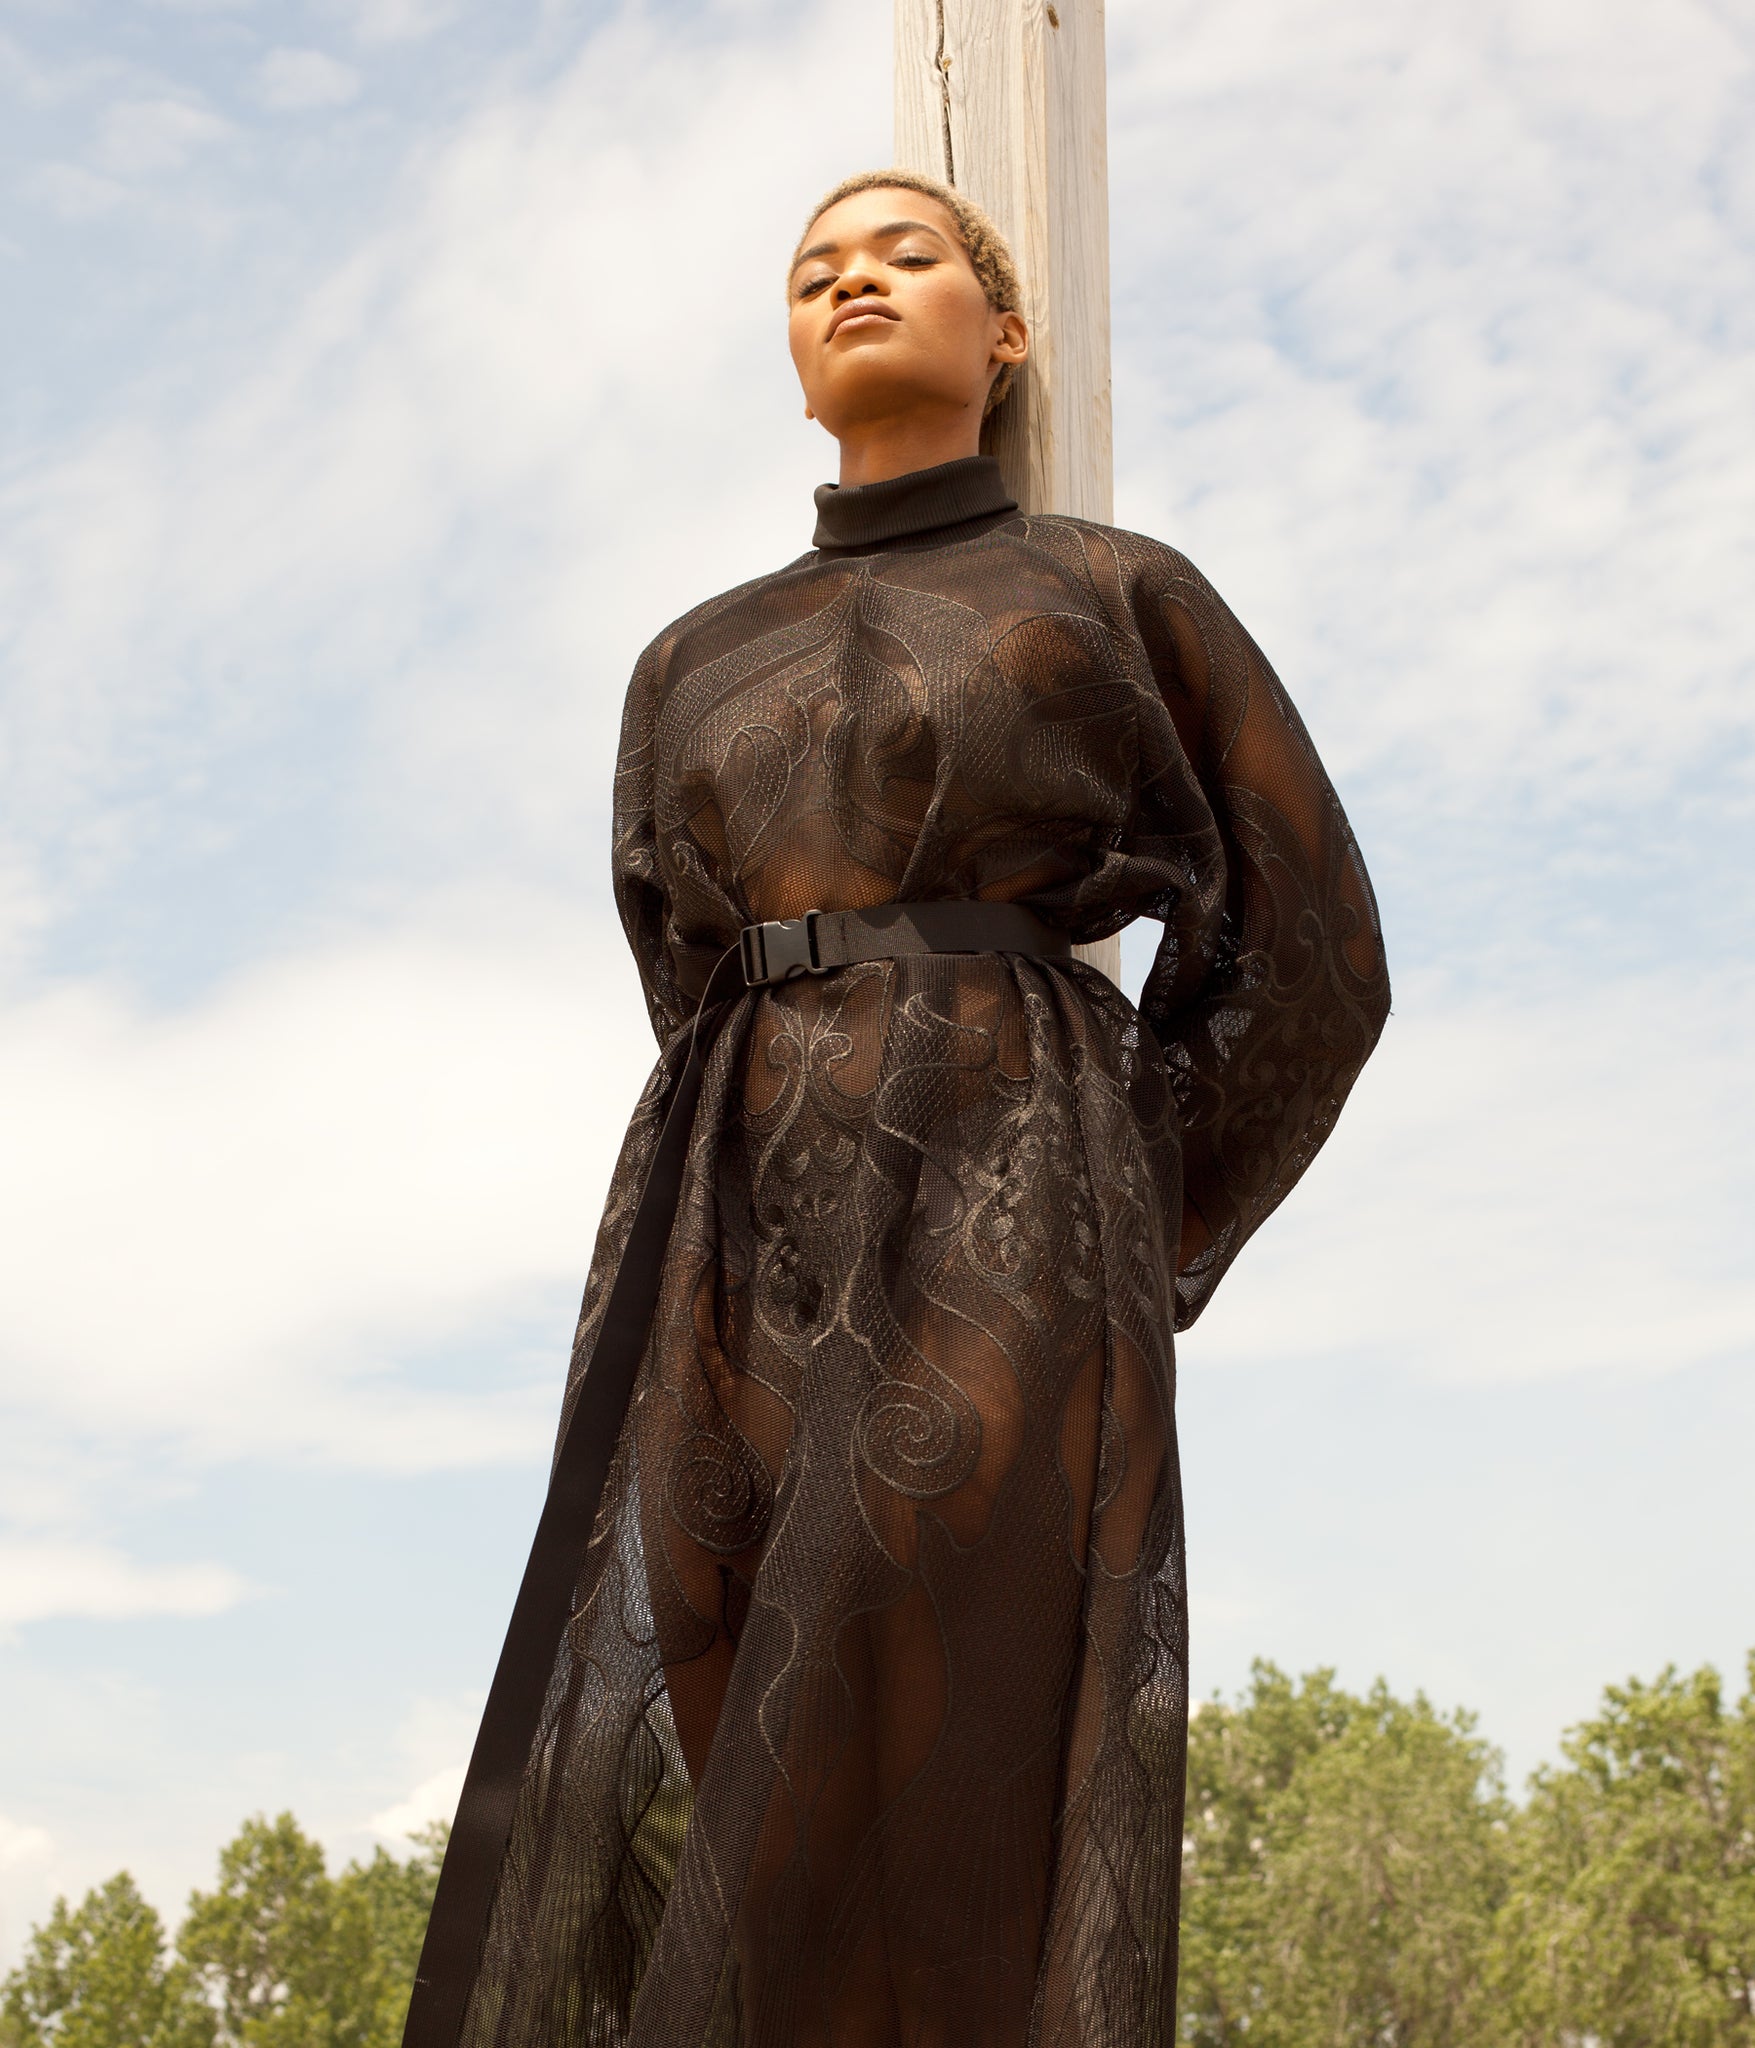 photo of model leaning against a wooden pole while wearing the House of Glass Hot Mesh Dress